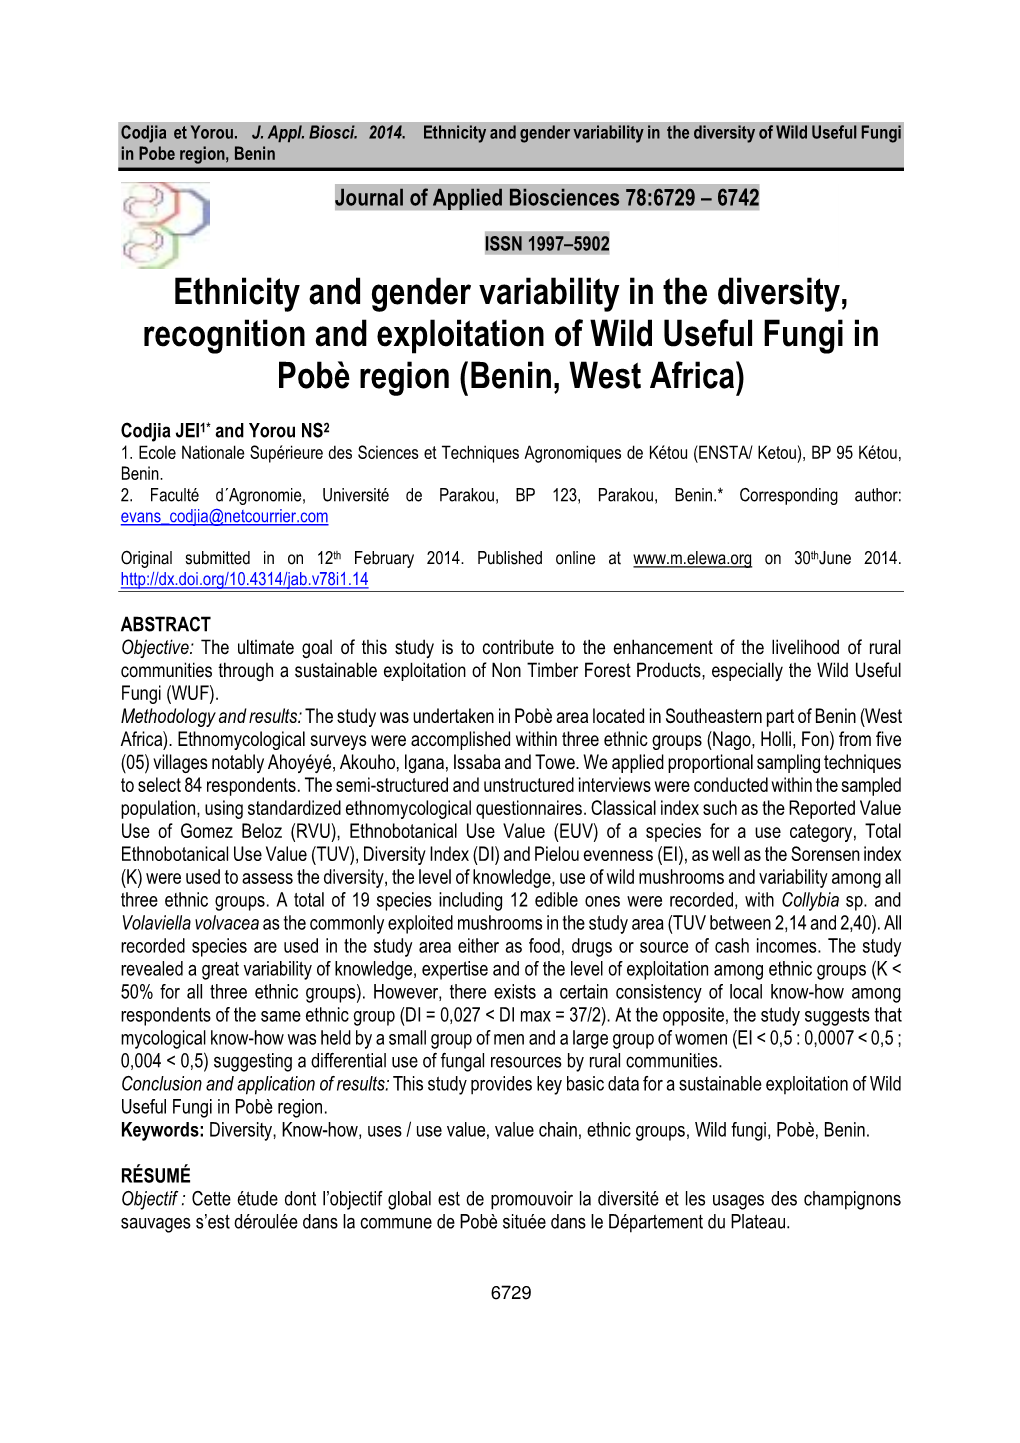 Ethnicity and Gender Variability in the Diversity, Recognition and Exploitation of Wild Useful Fungi in Pobè Region (Benin, West Africa)